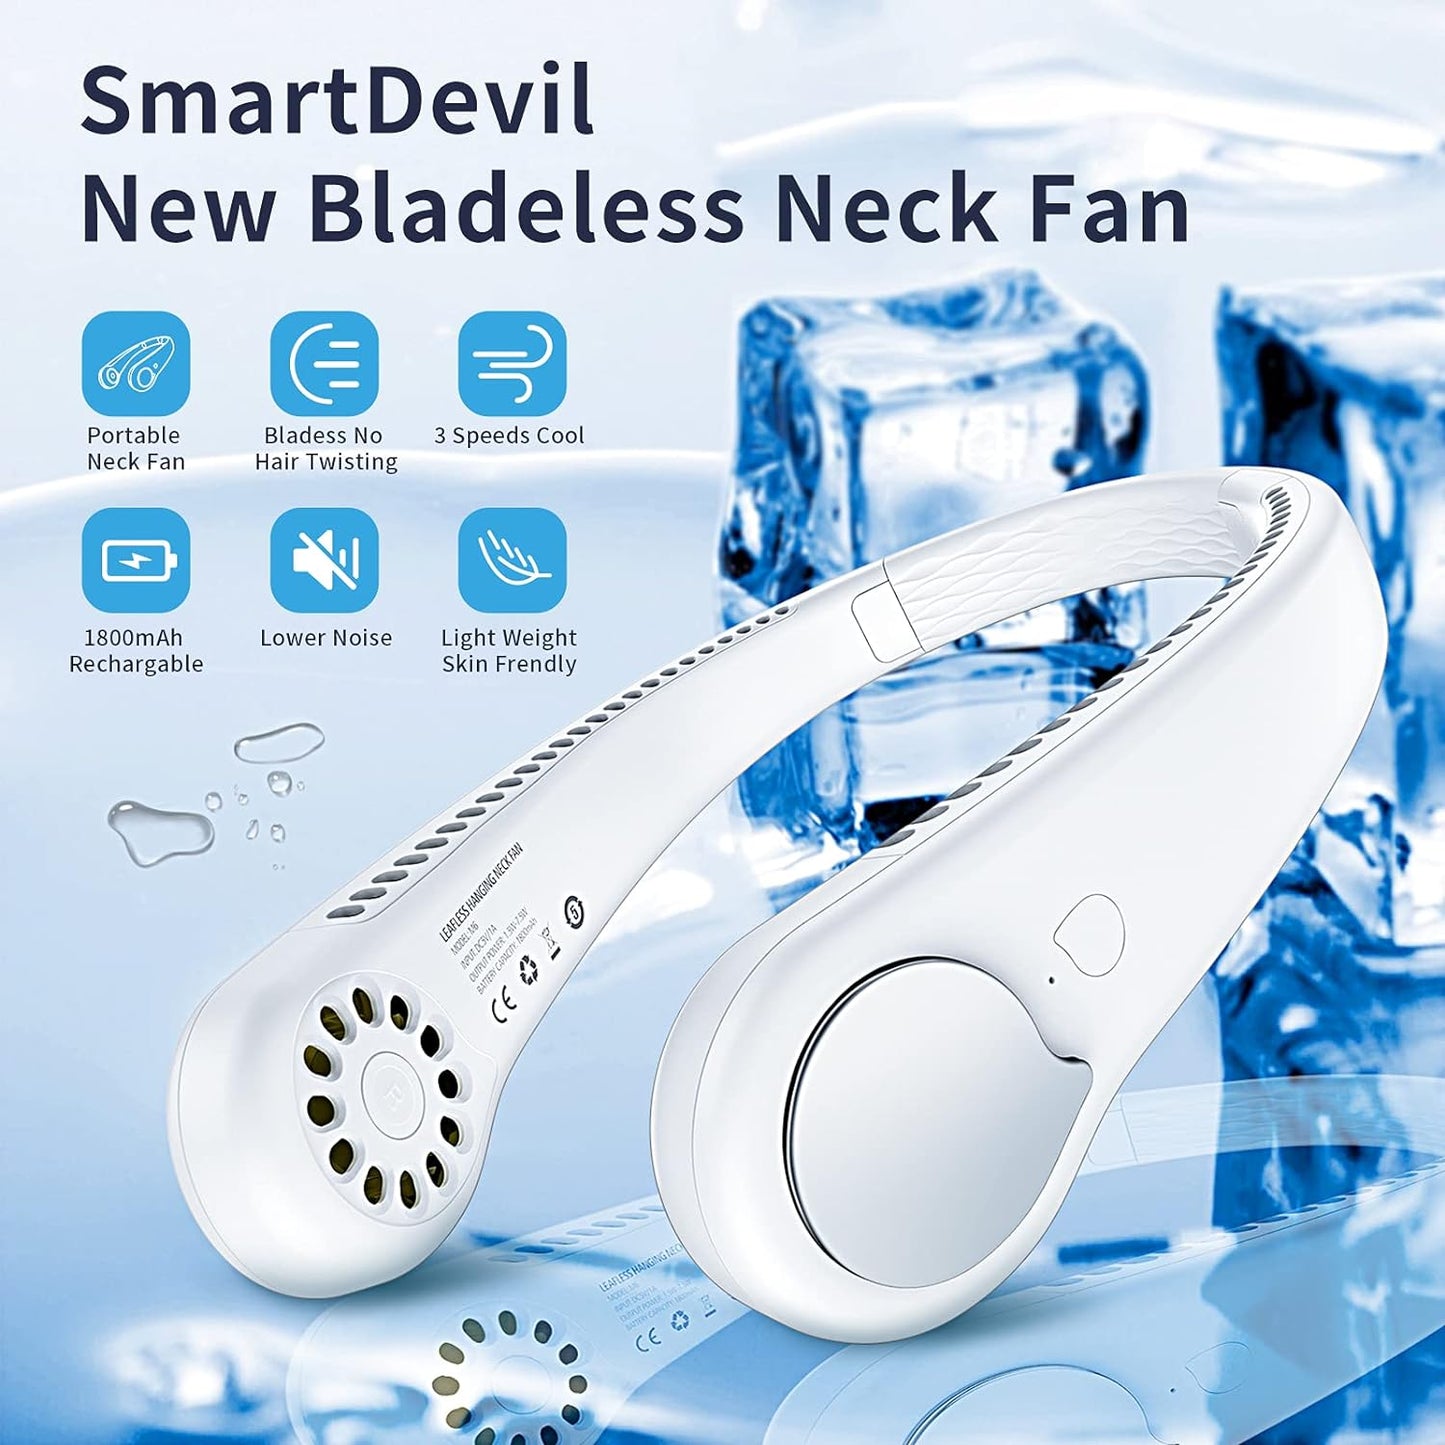 SmartDevil Personal Neck Fan, Rechargeable Battery Operated Wearable Portable Fan, 360° Cooling Hanging Neck Fan, 3 Speeds, 48 Air Outlet(White)